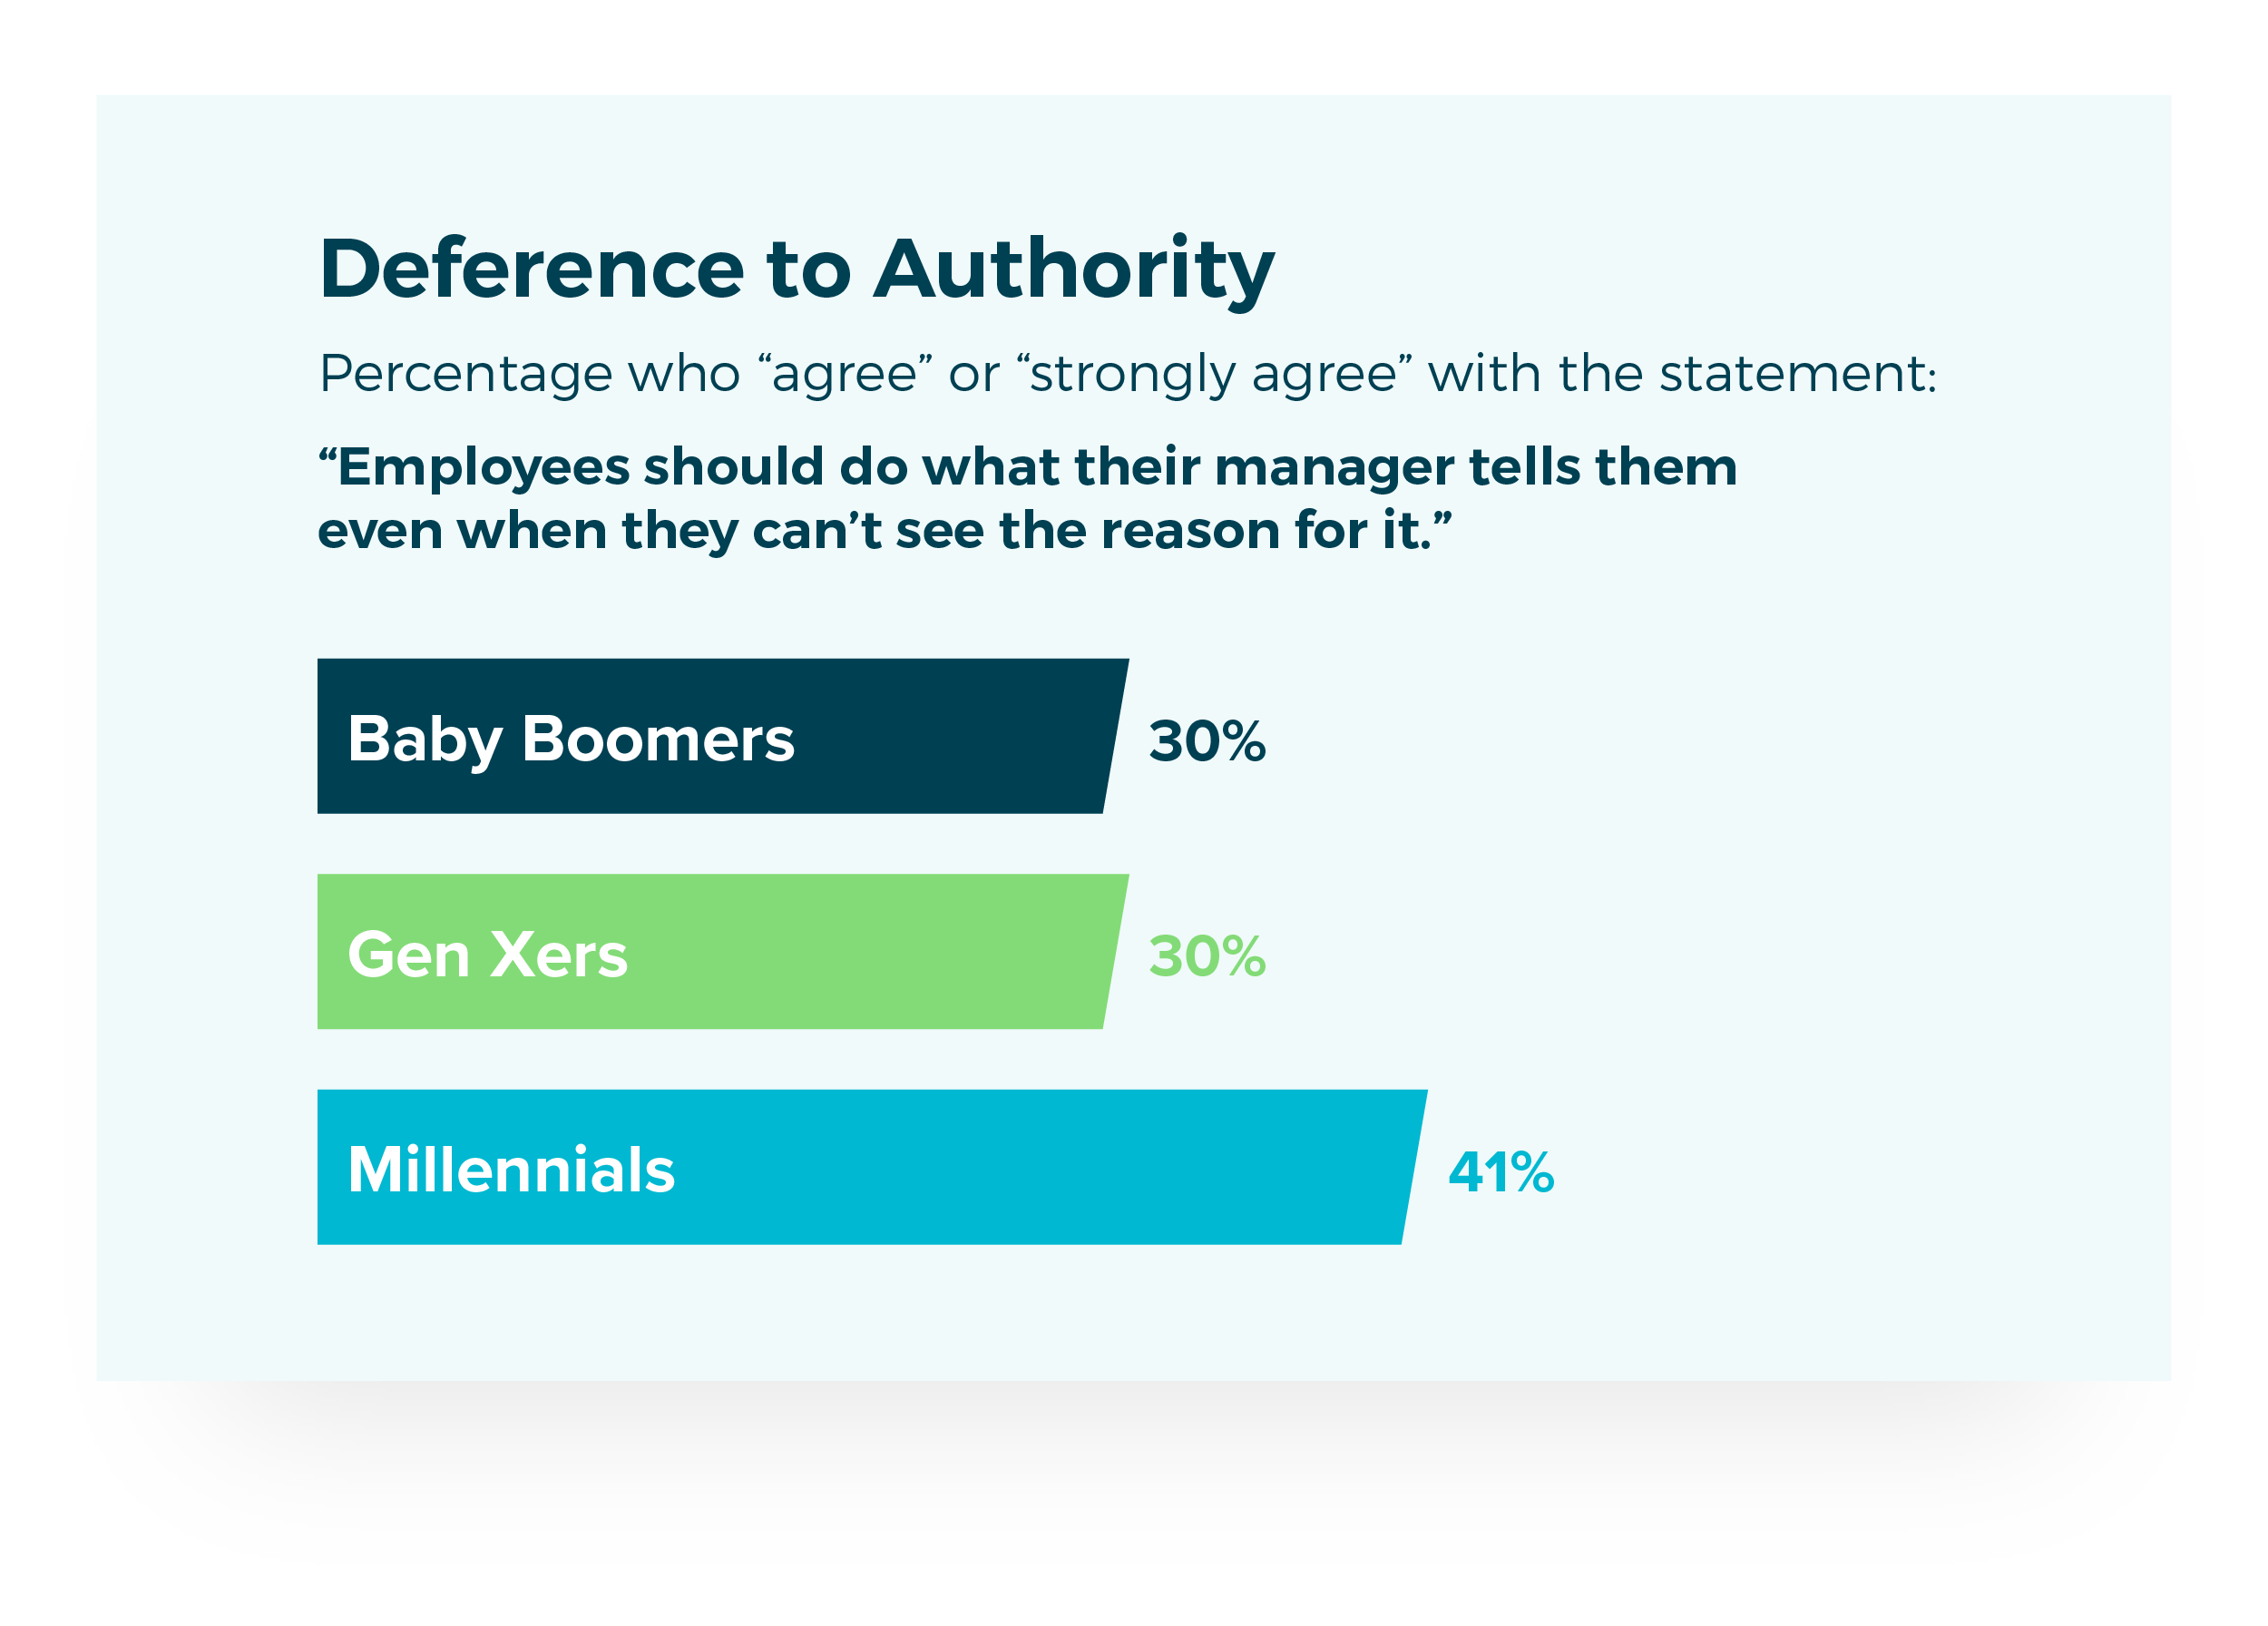 Deference to Authority. Percentage who agree or strongly agree with the statement: Employees should do what their manager tells them even when they can't see the reason for it. Baby Boomers 30%, Gen Xers 30%, Millennials 41%